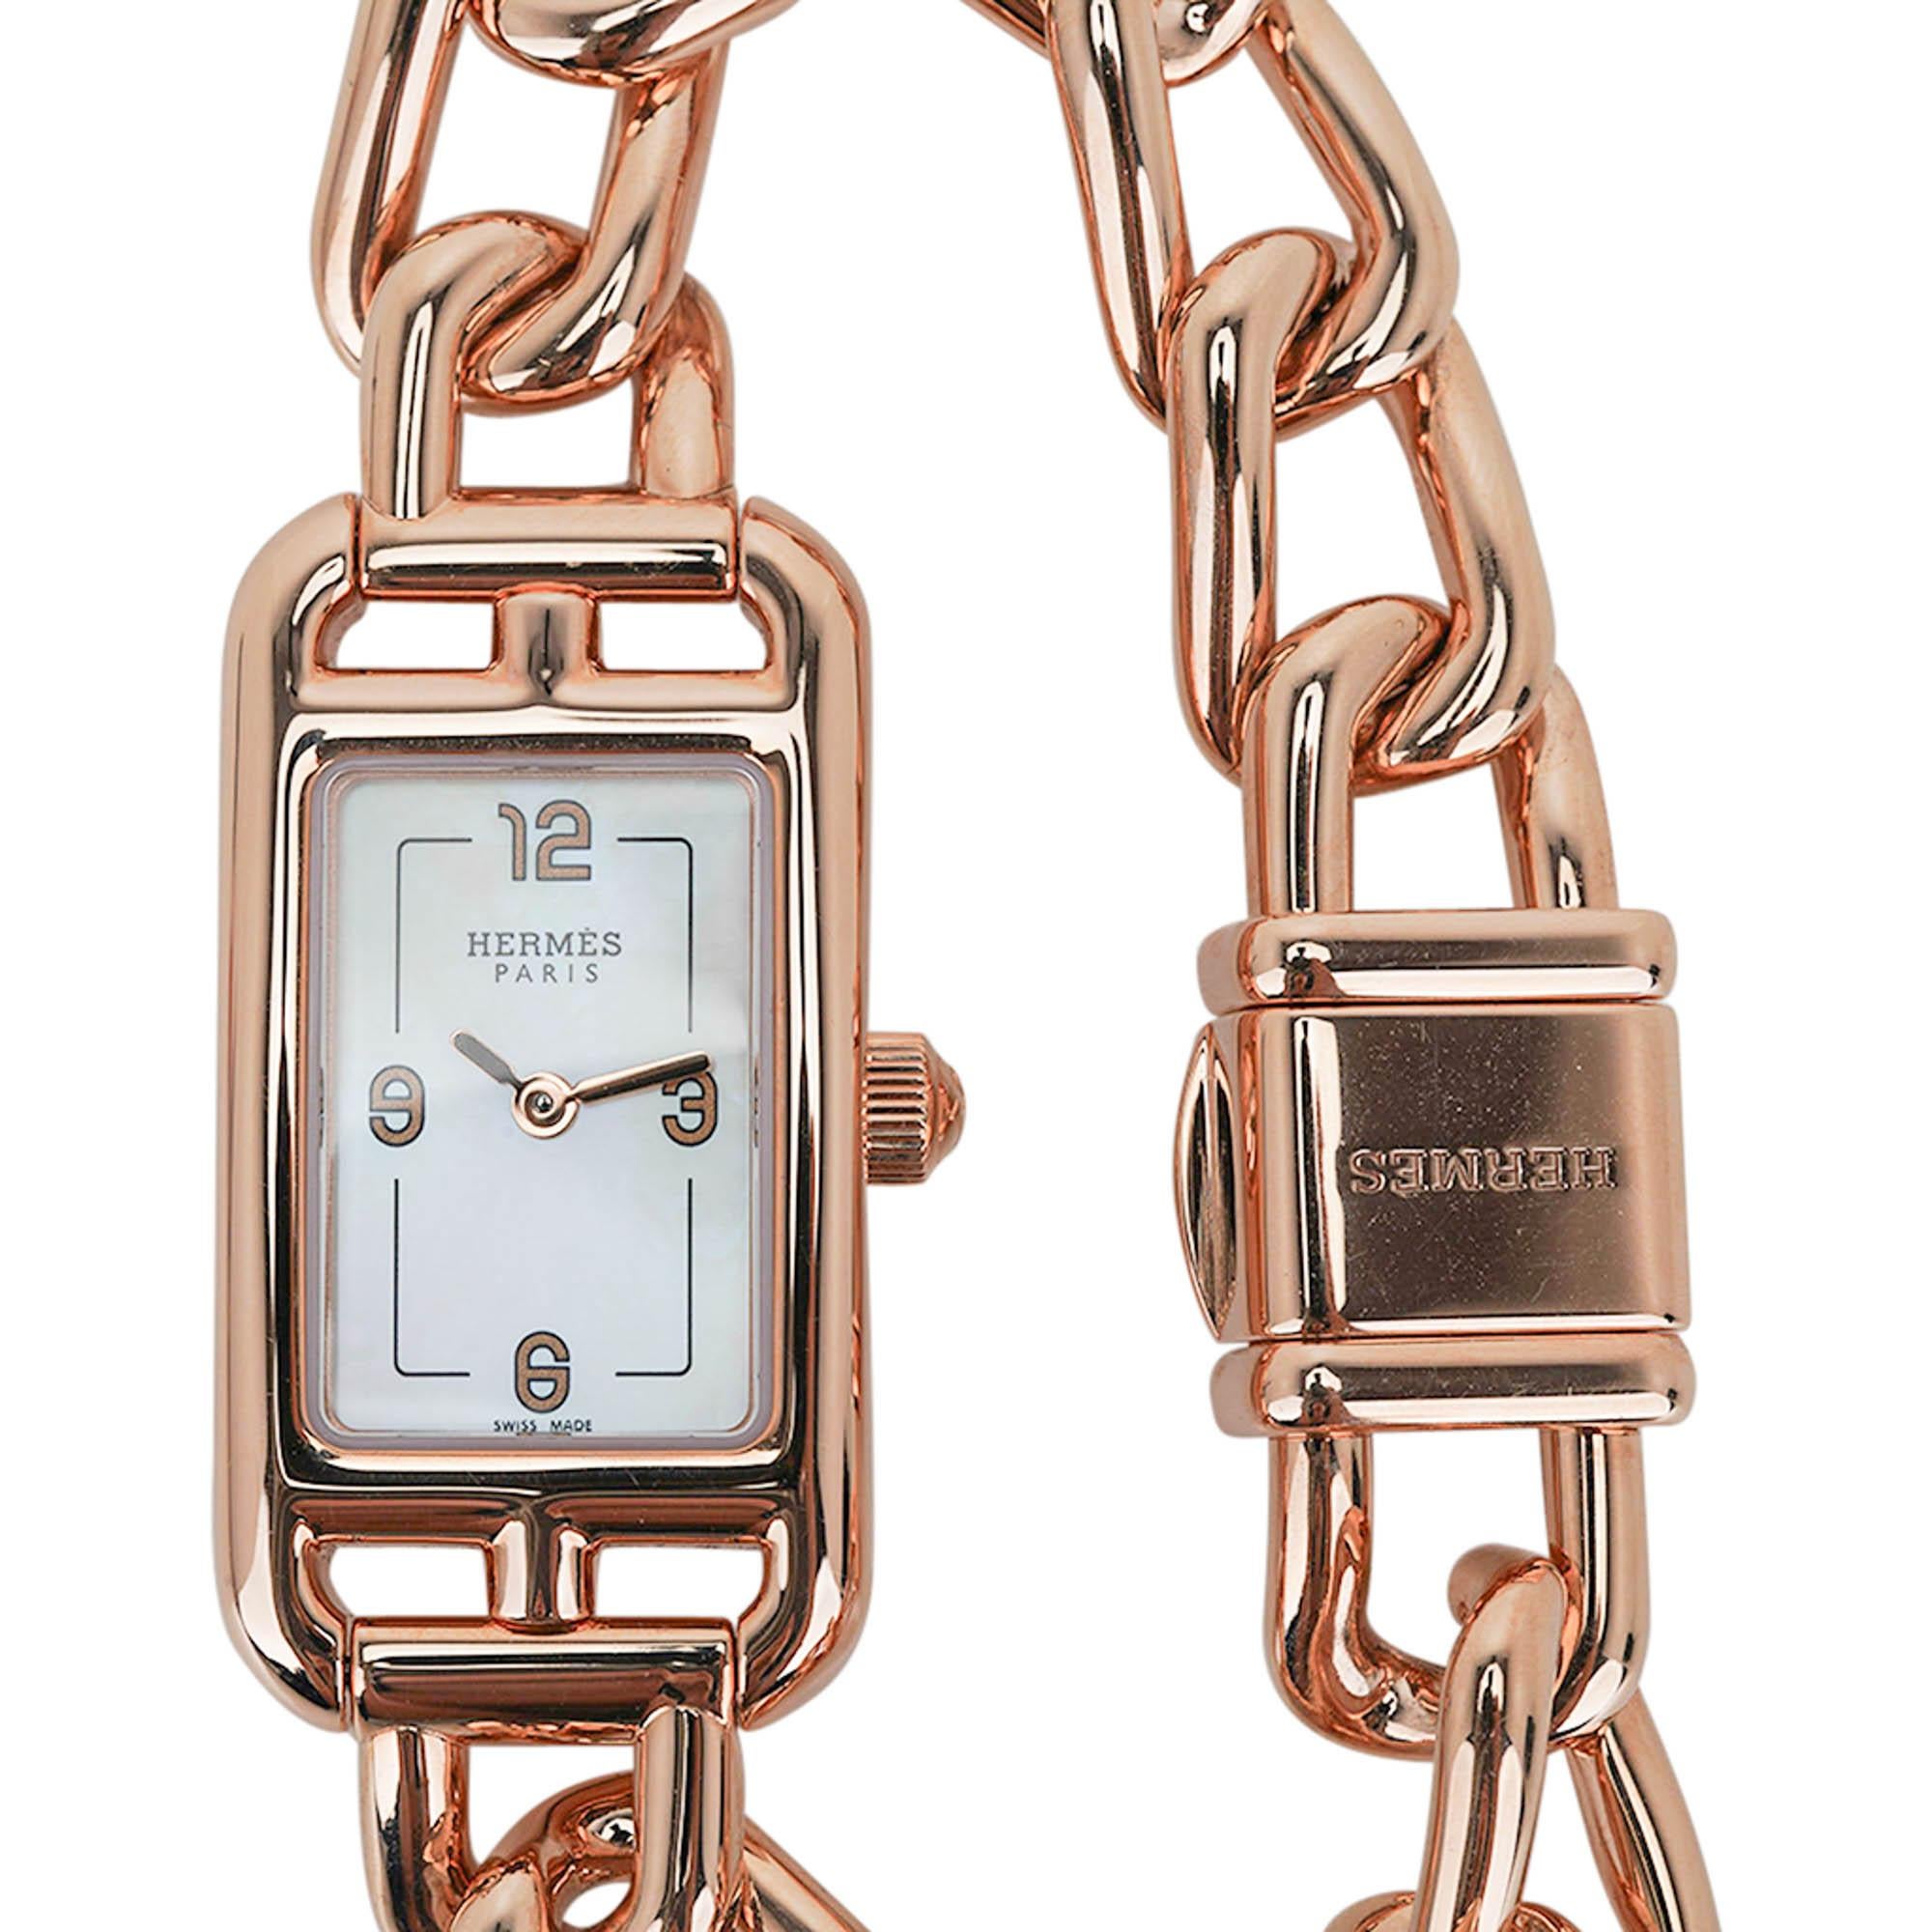 Mightychic offers an Hermes Nantucket Small Model watch featured in 18k Rose Gold.
This beautiful watch is the 29 mm small model with Rose Gold bracelet.
White Mother of Pearl dial with hour functions only.
Made in Switzerland with quartz